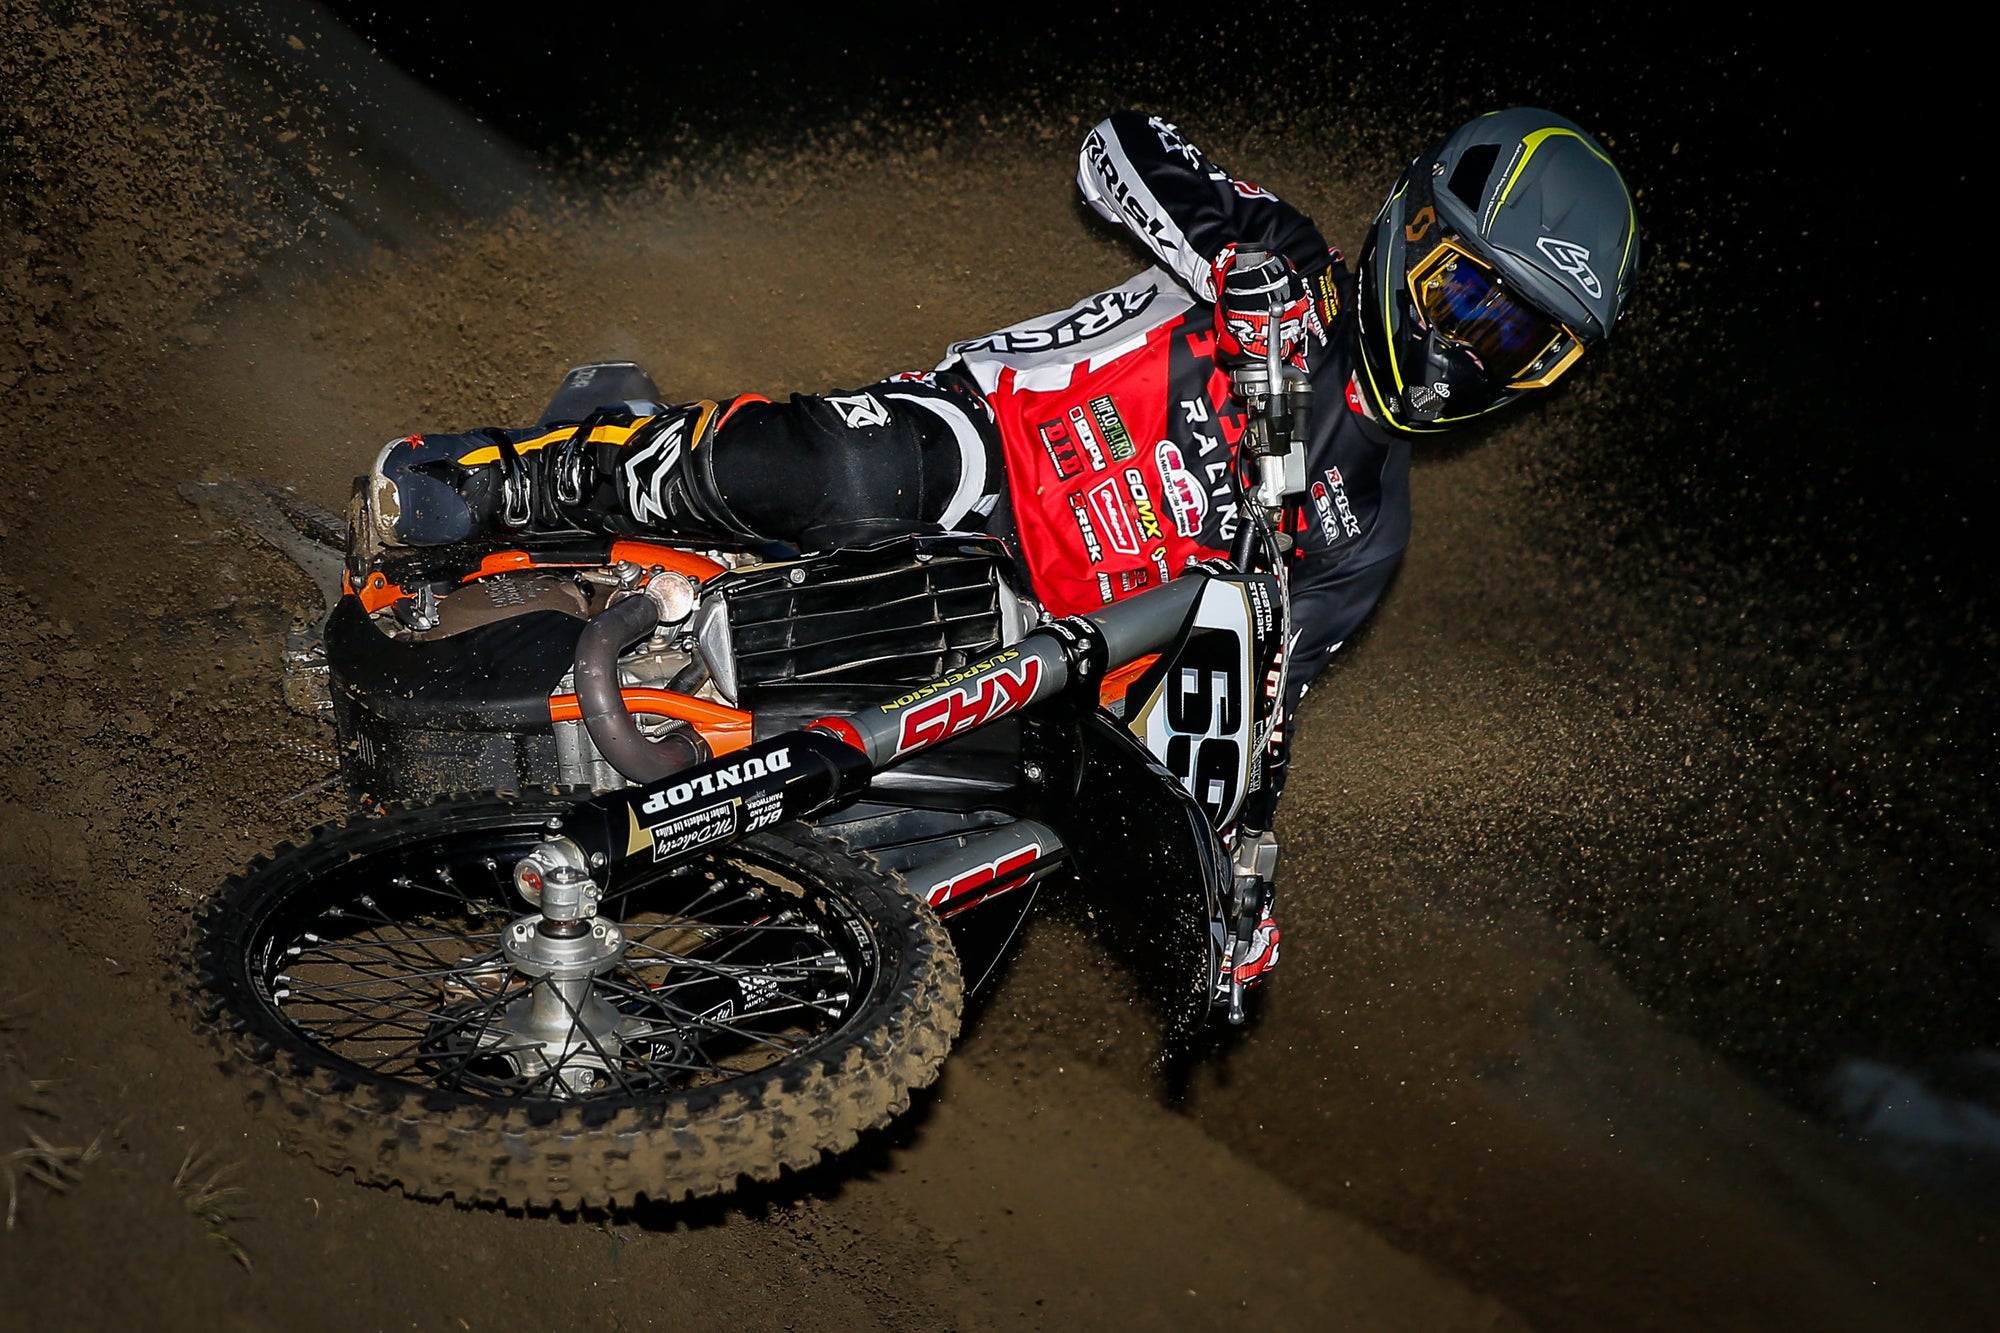 Motocross rider hitting a turn in the sand in risk racing ventilate v2 series gear. Sand flying from the rear tire of the motorcycle.